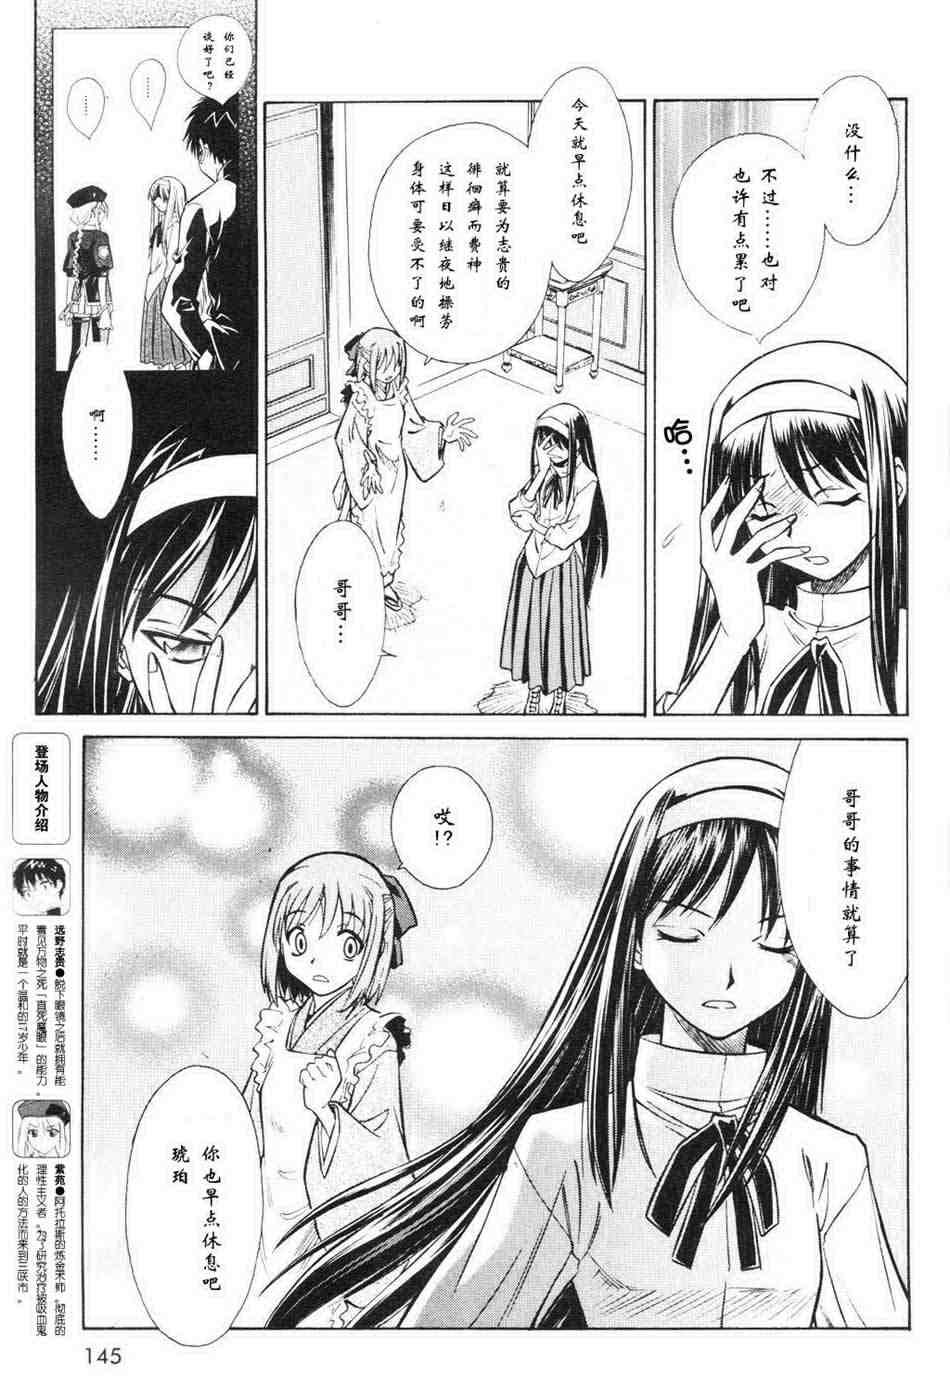 《Melty Blood》漫画 ch_13